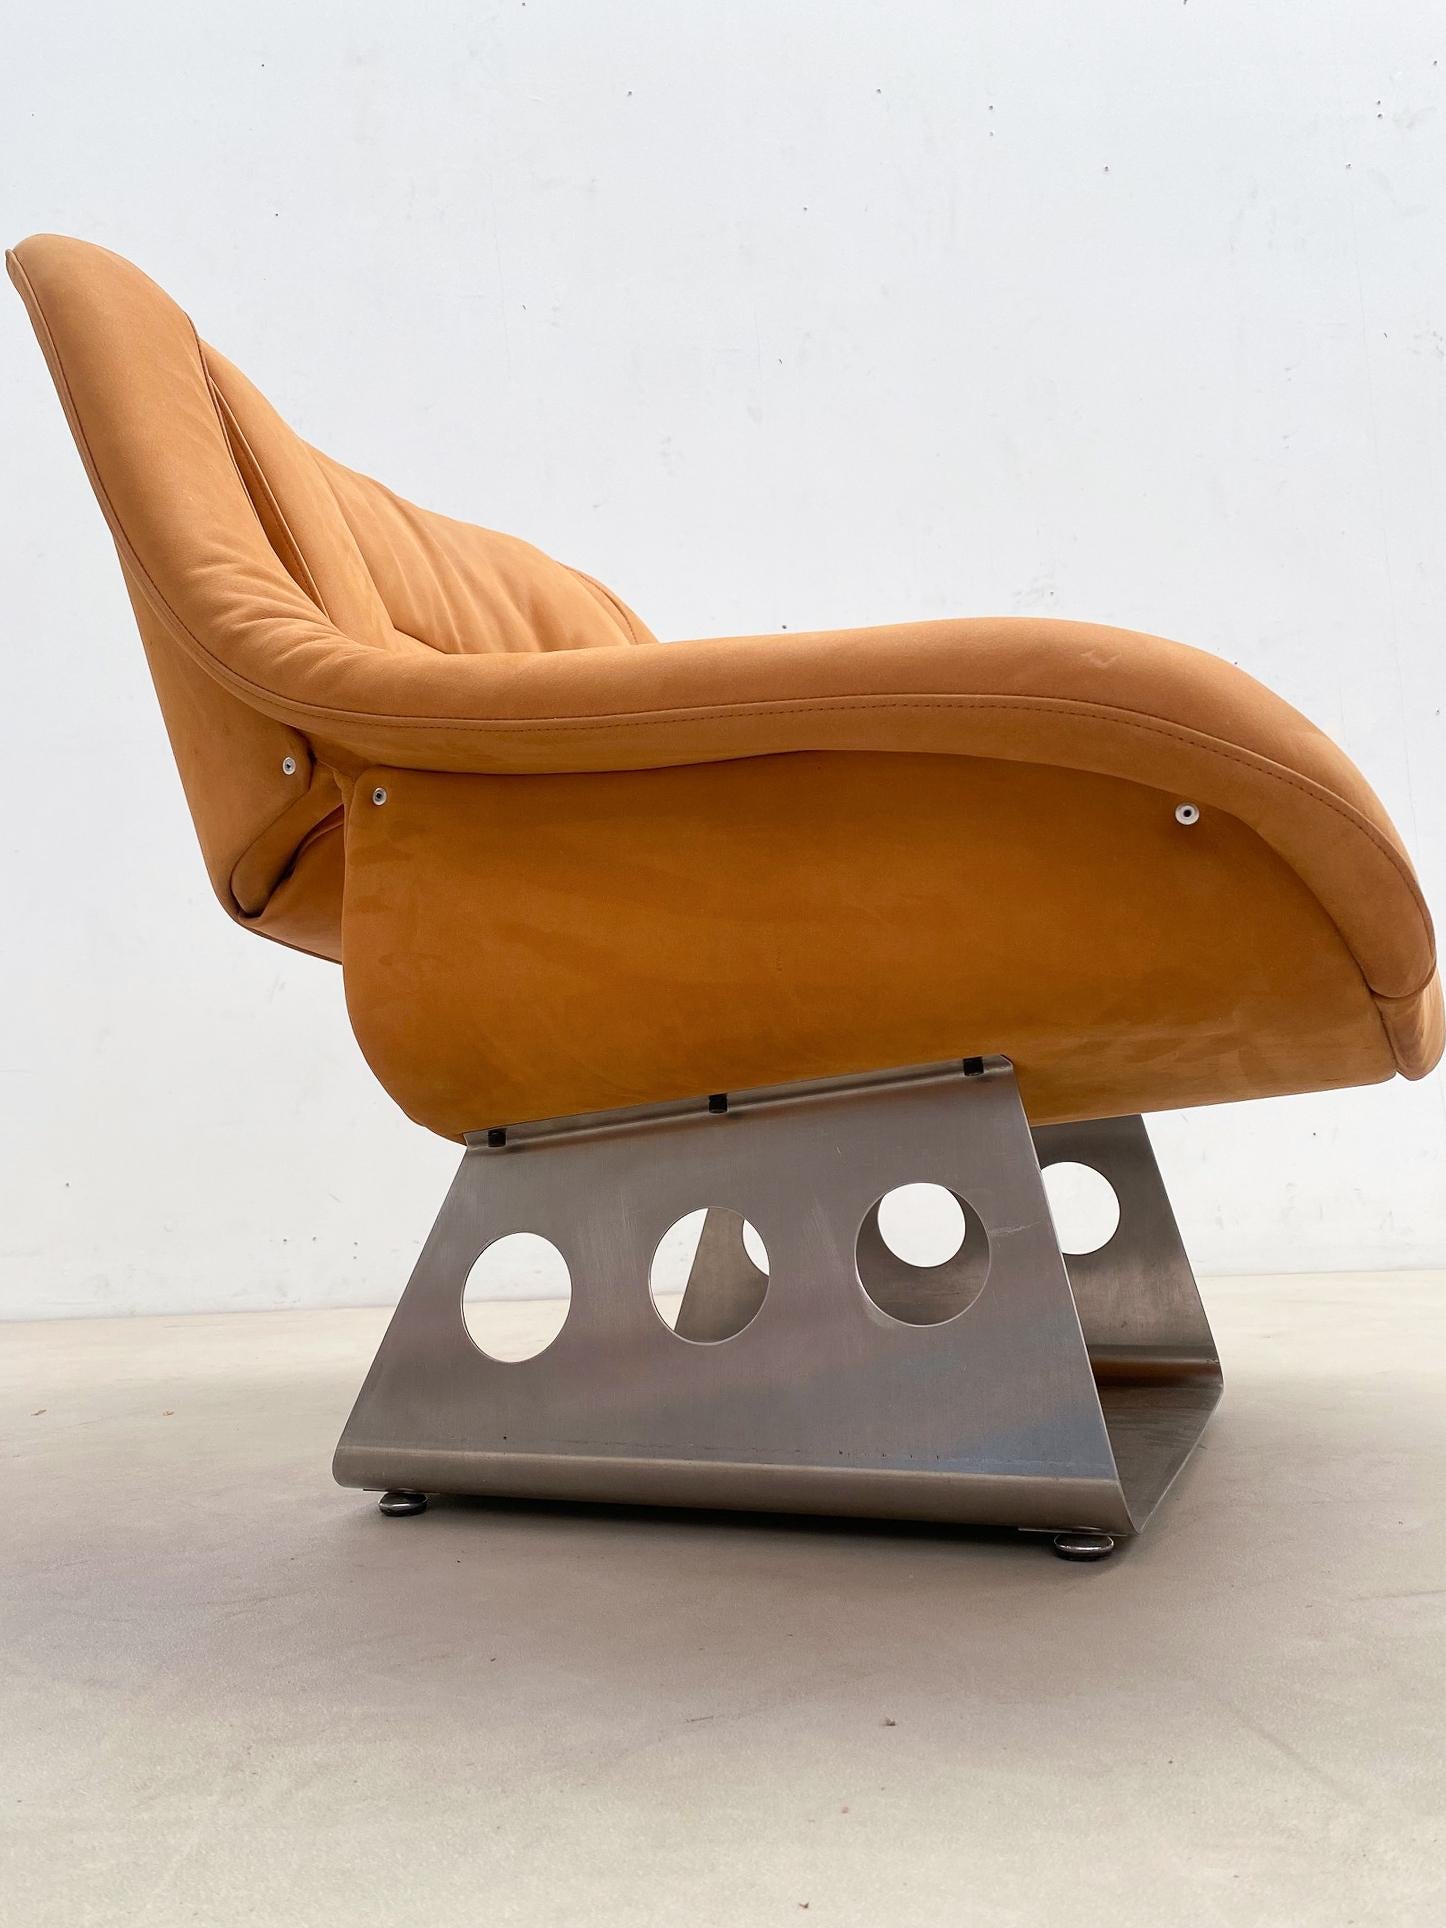 Metal Mid-Century Lounge Chair and Ottoman, Italy, 1970s - New Leather Upholstery For Sale